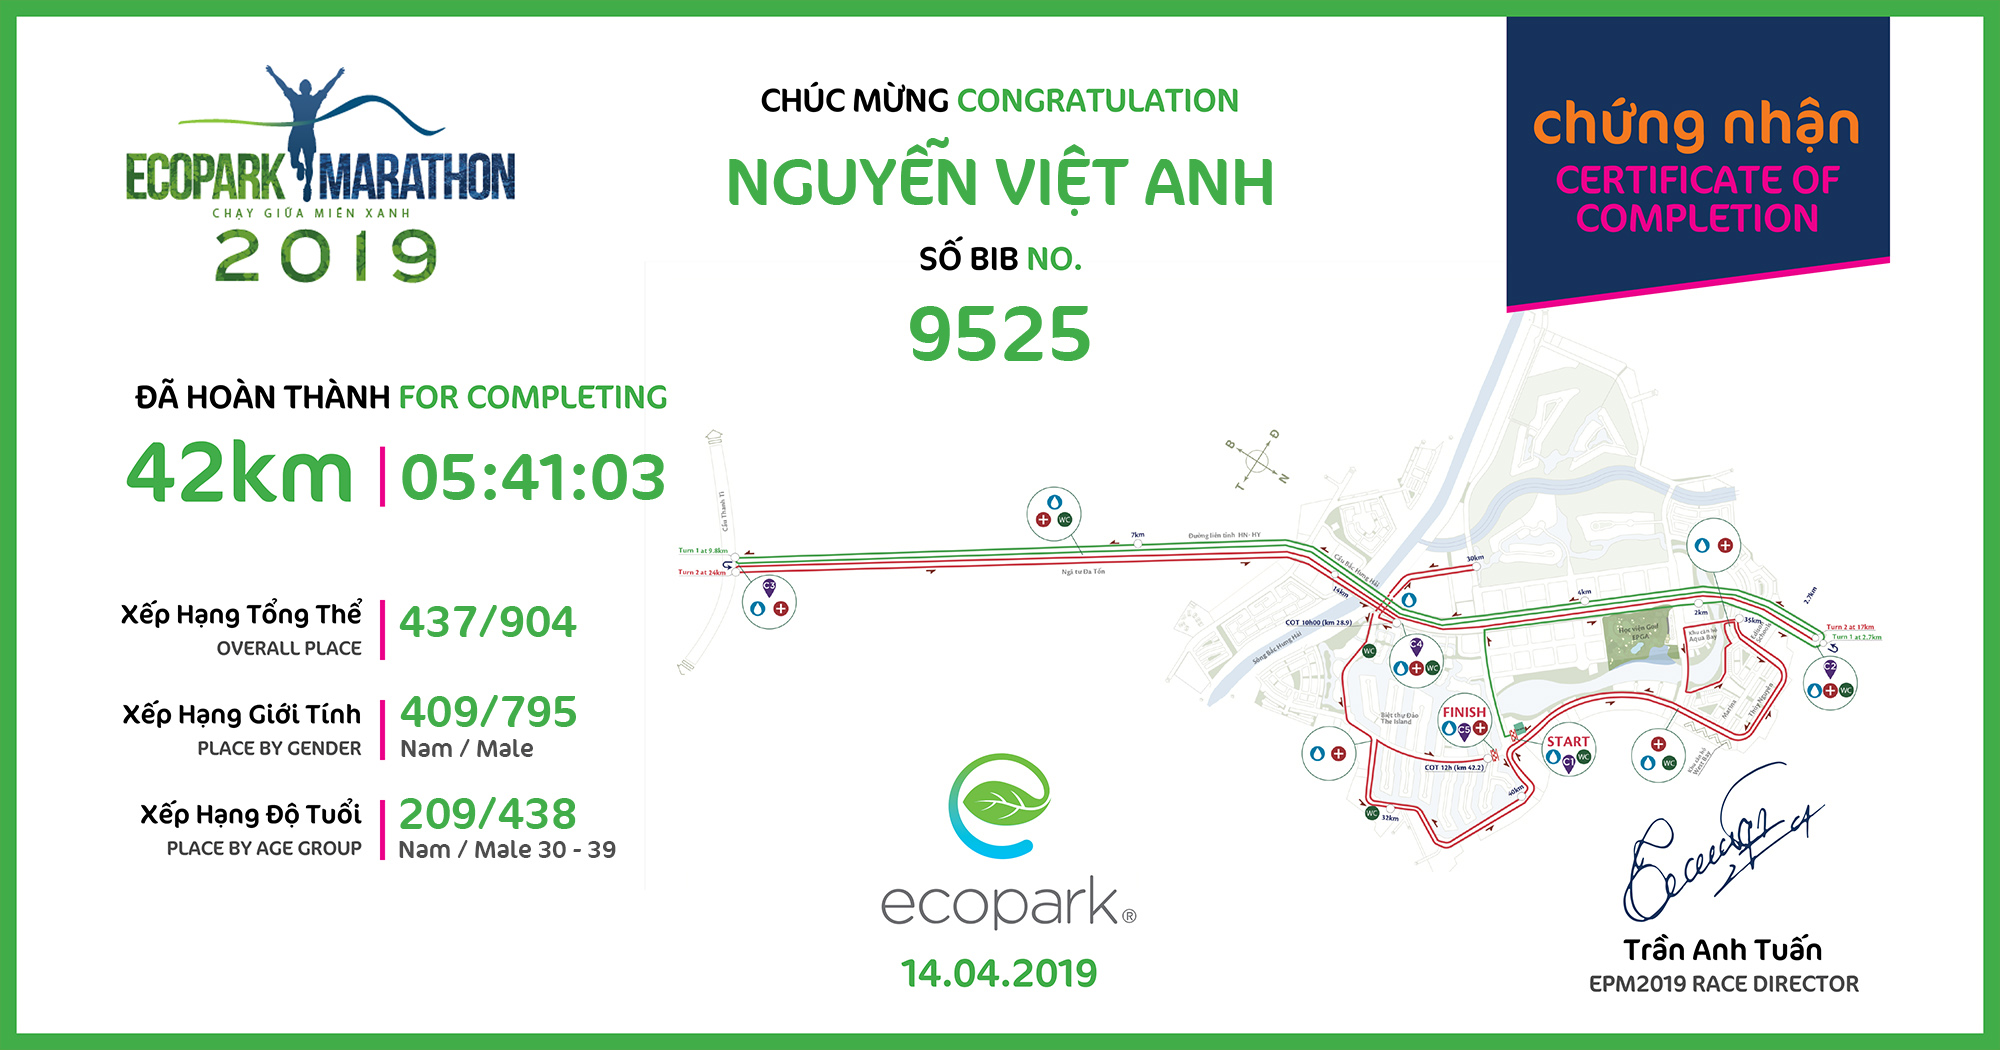 9525 - Nguyễn Việt Anh